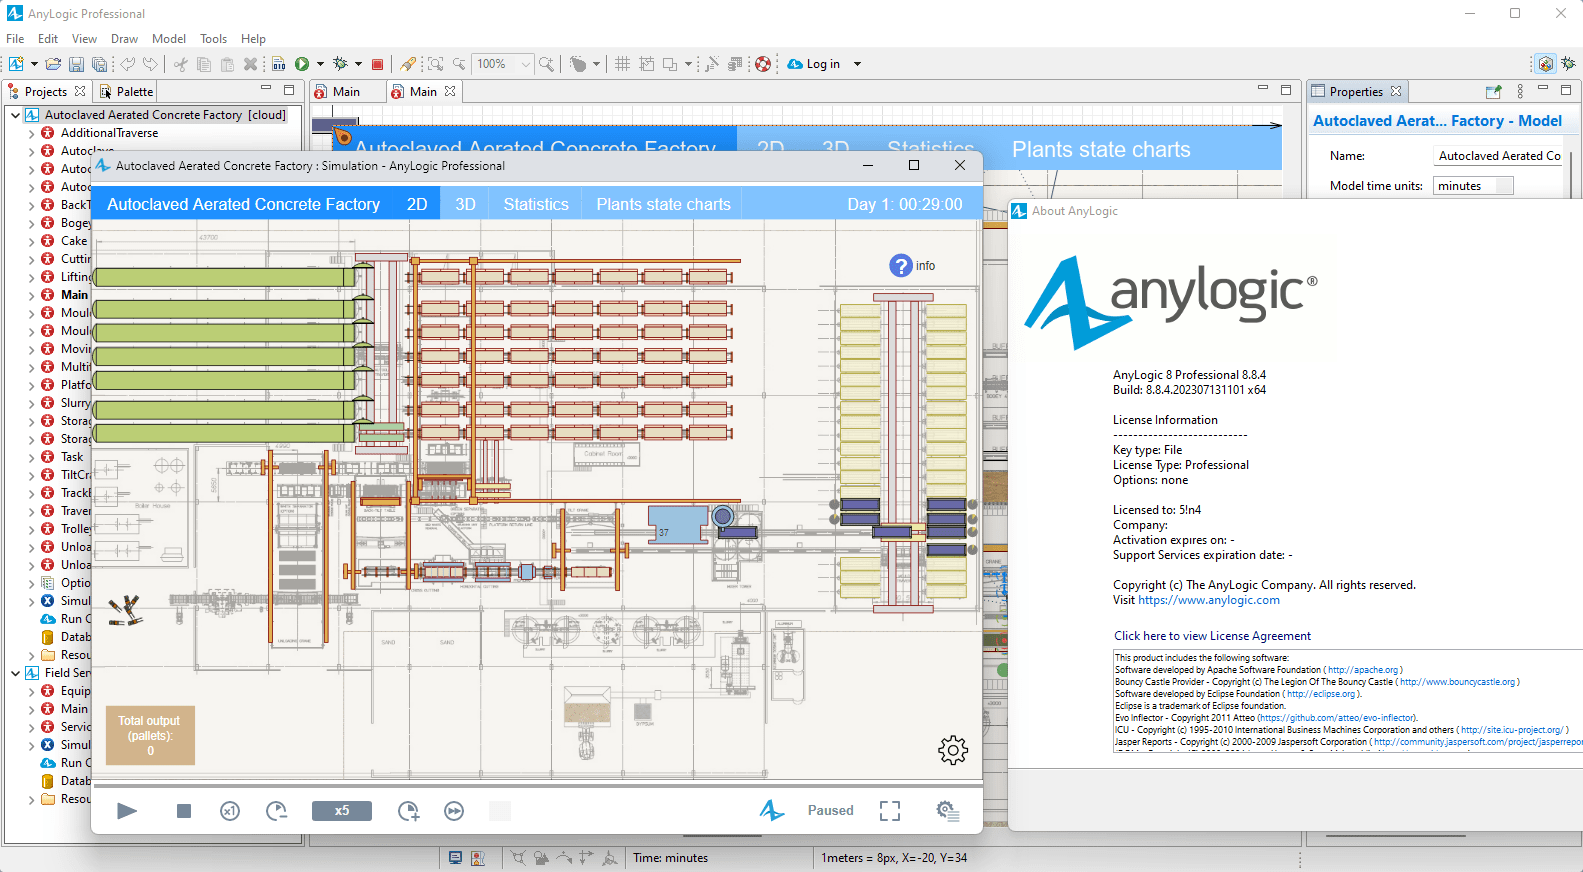 Working with AnyLogic Professional 8.8.4 full license